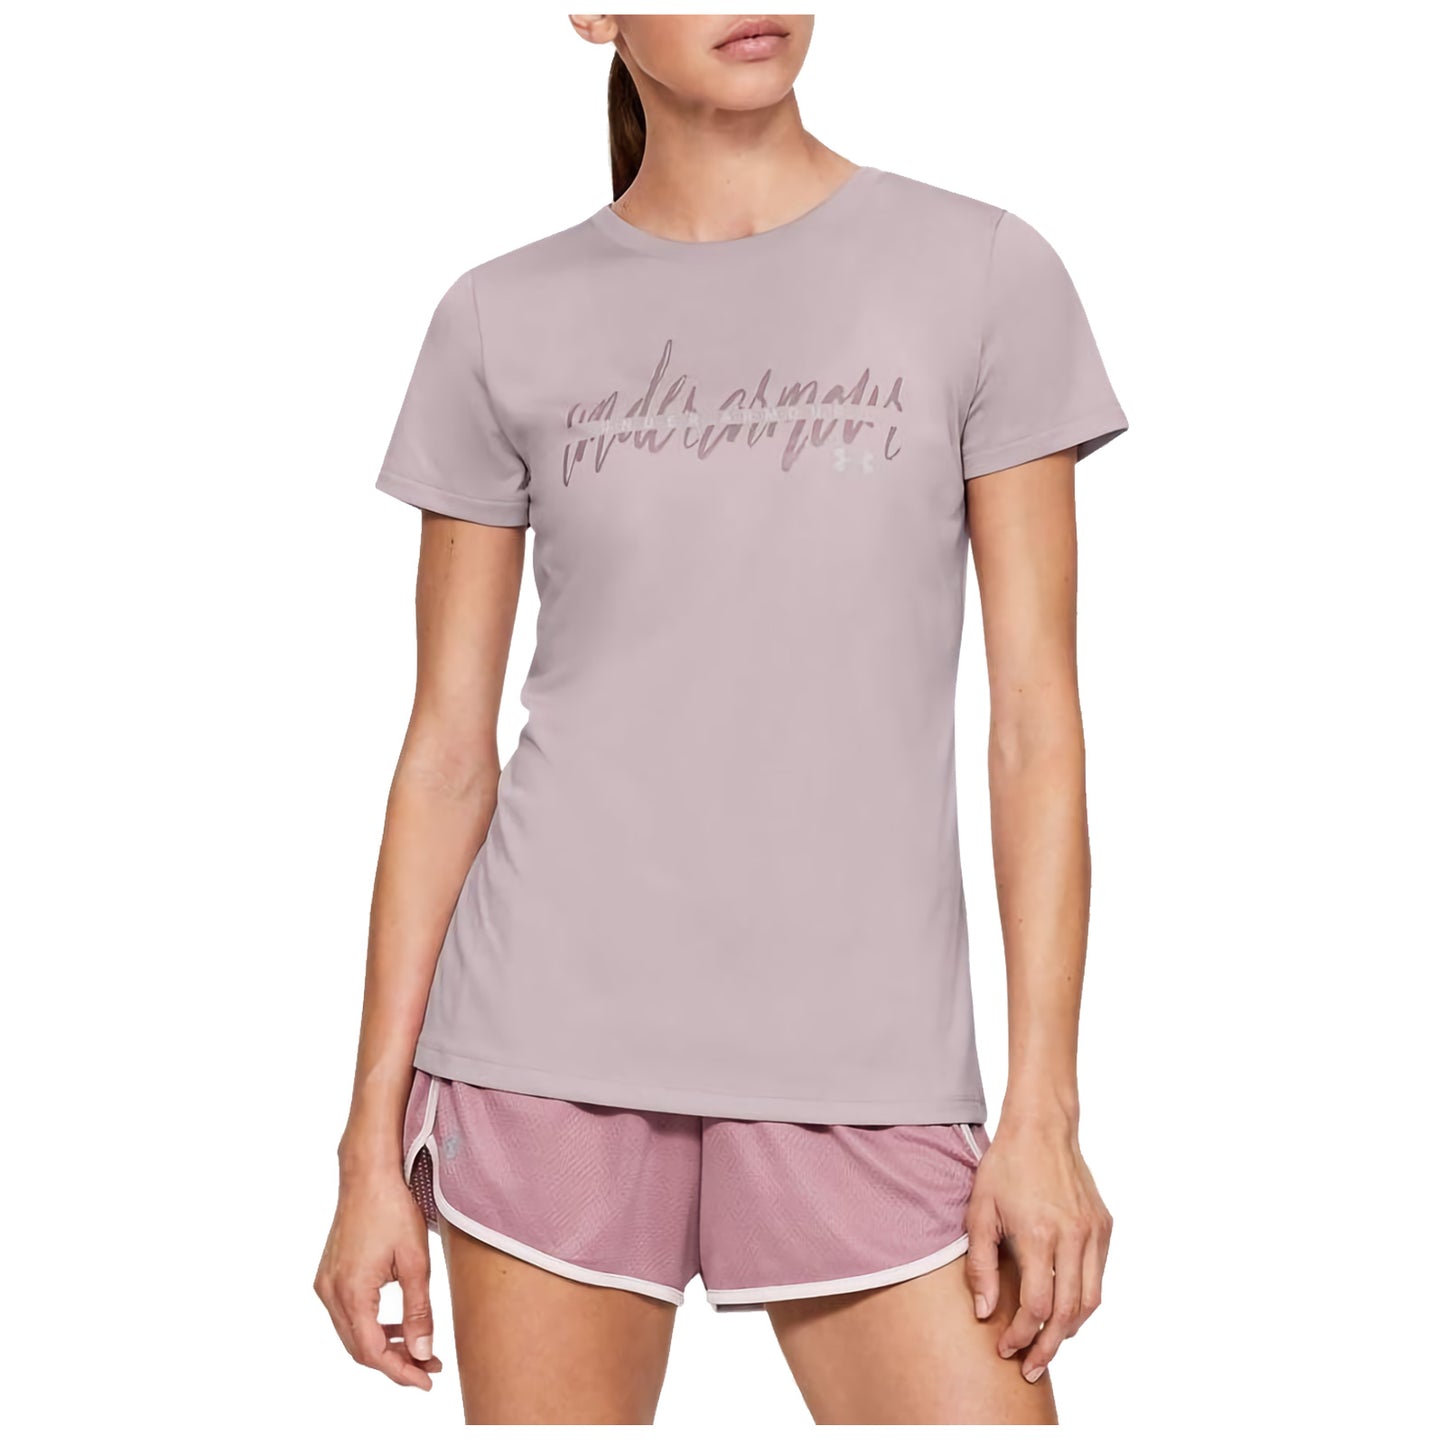 Under Armour Ladies Tech Branded Fit Kit T-Shirt